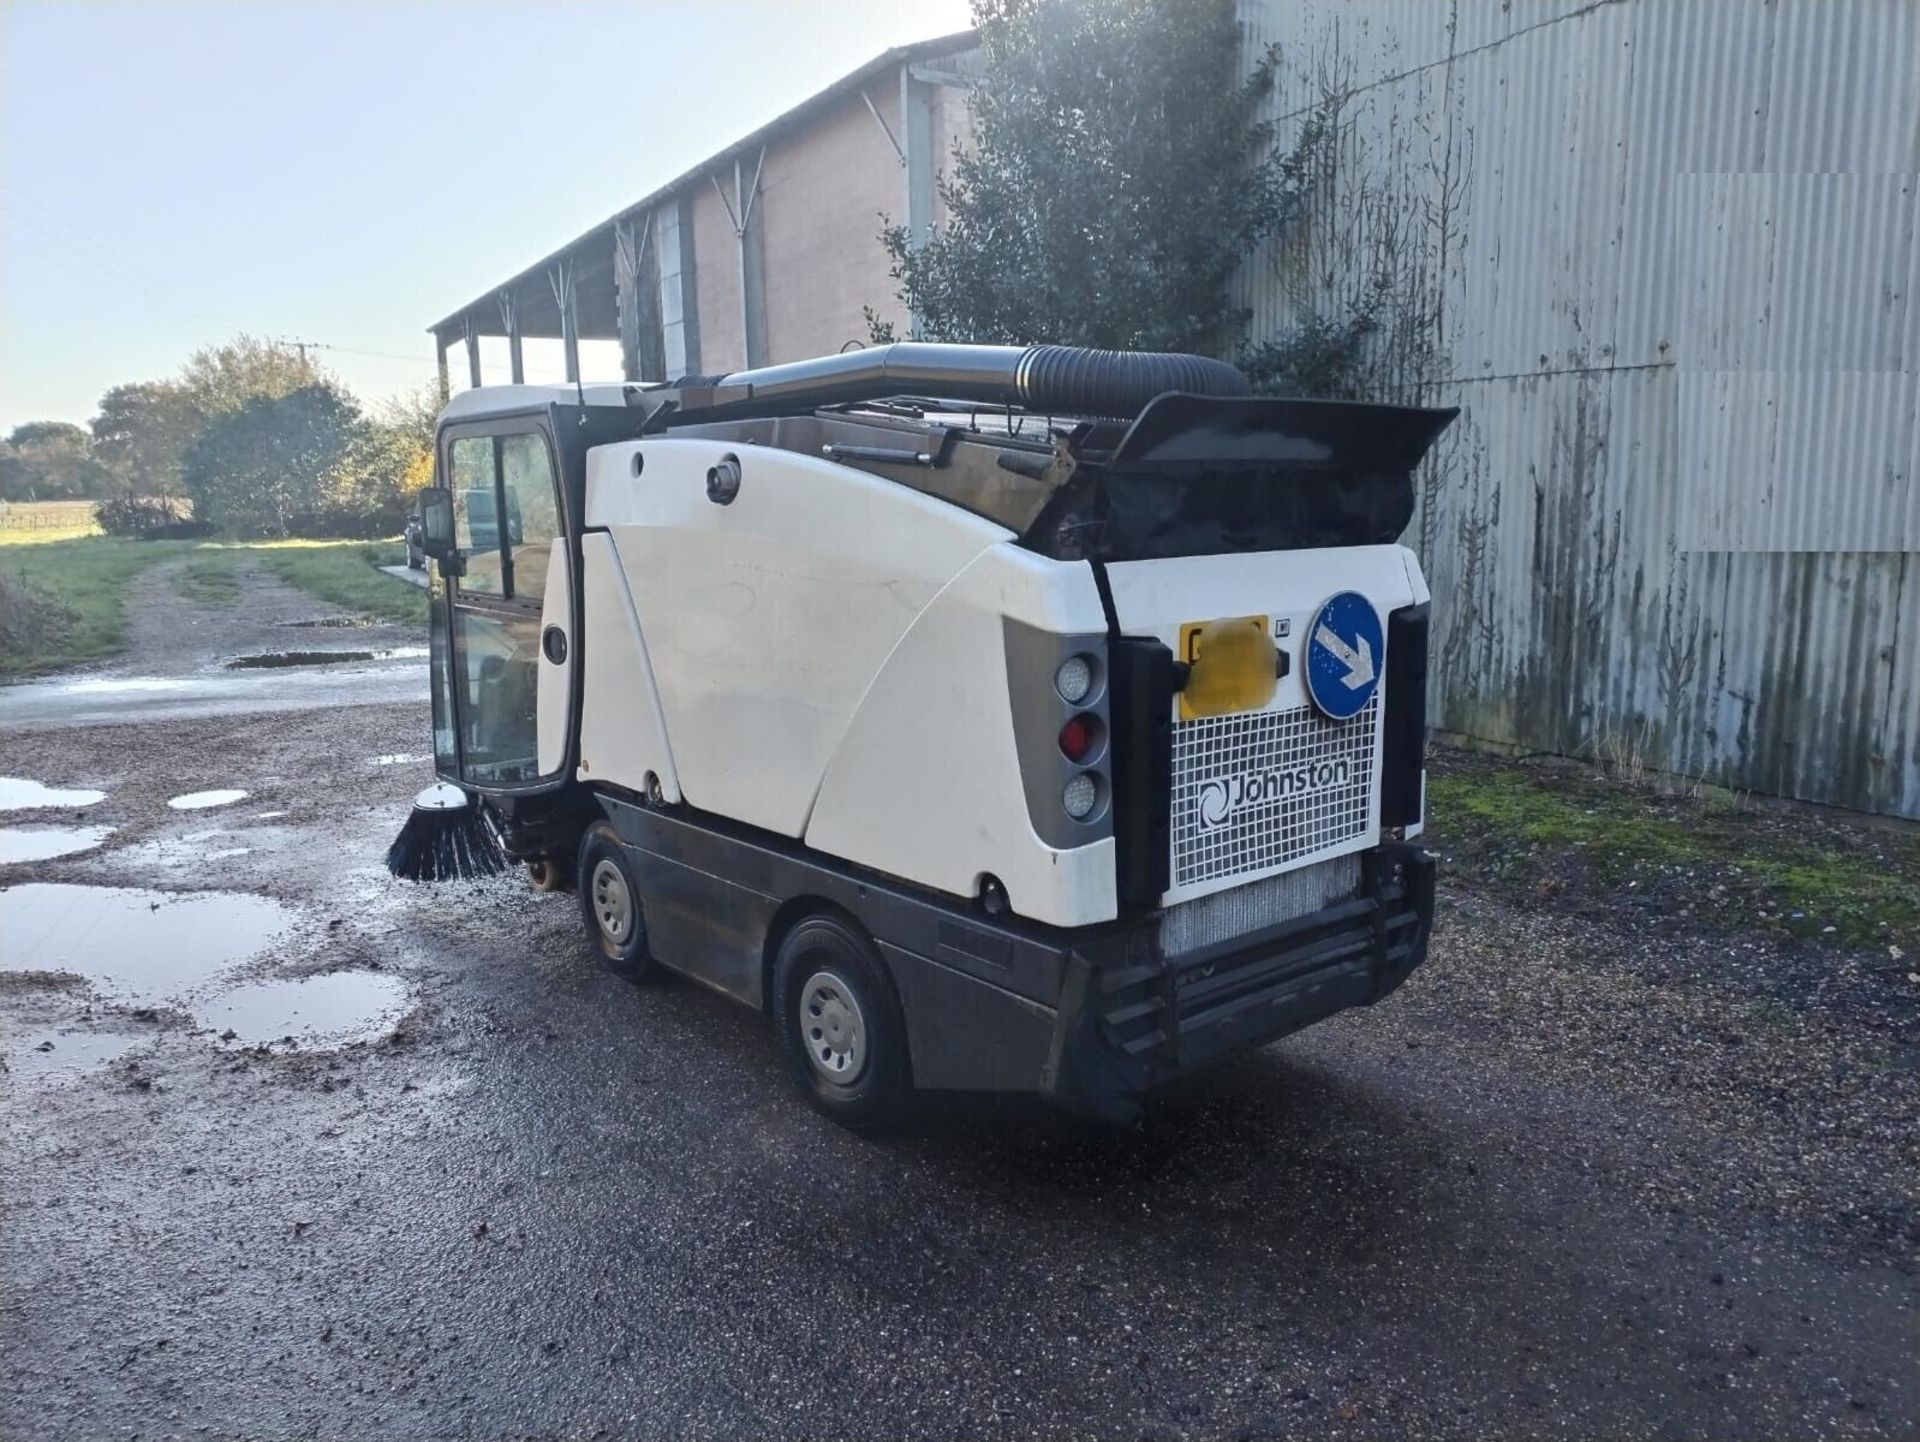 2013 JOHNSTON ROAD SWEEPER HYDROSTATIC - Image 3 of 7